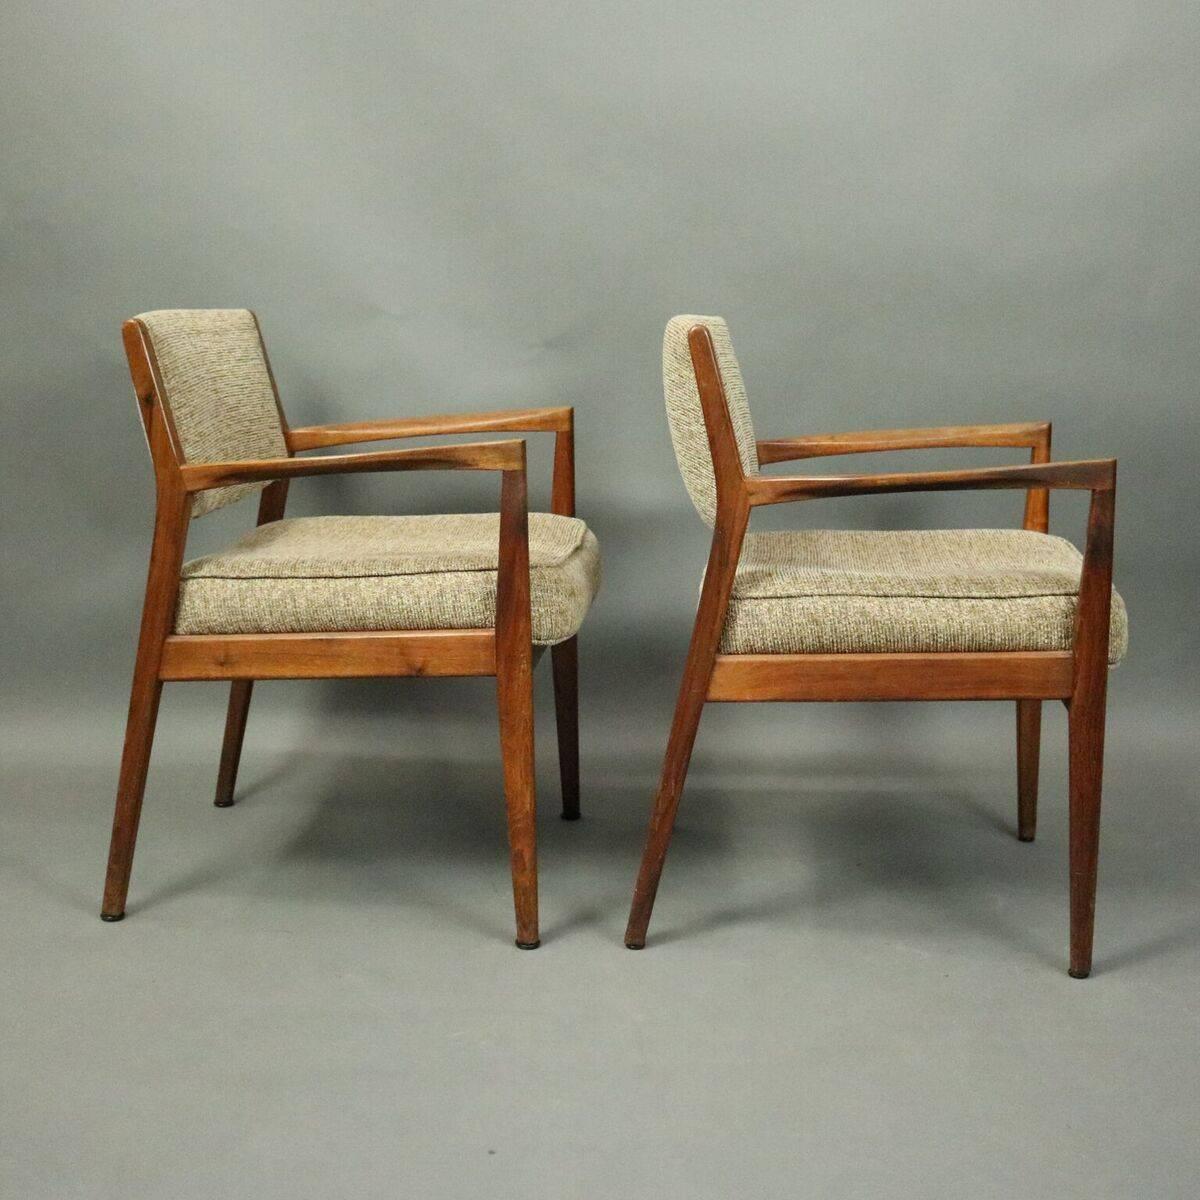 Pair of Mid-Century Danish modern armchairs feature teak construction, upholstered seat and back, original tag Edward Axel Roffman Associates, Inc., New York New York, Allentown Pennsylvania, numbered metal tag 4434, circa 1960.

Measures -